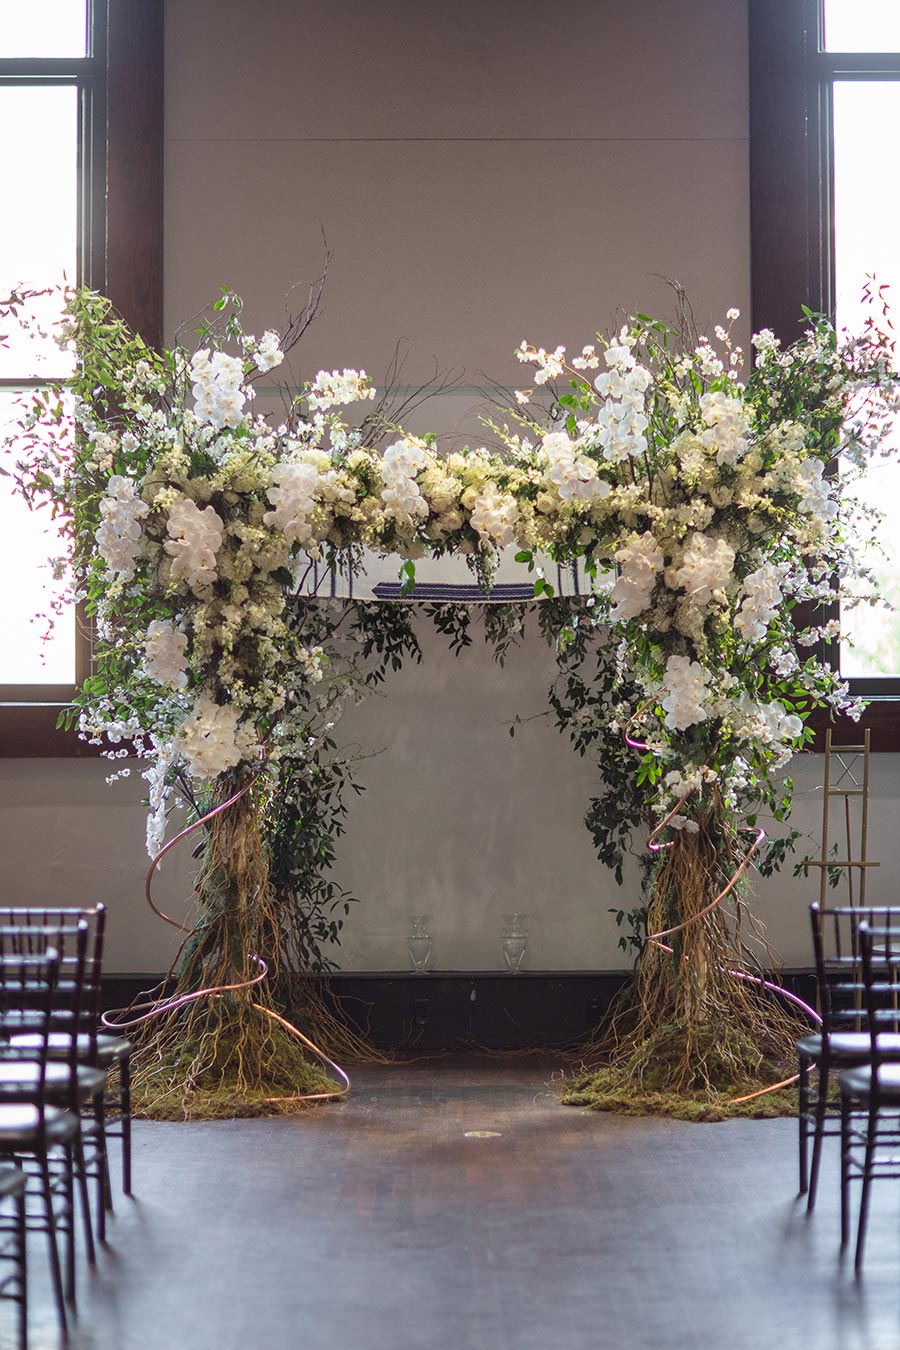 Jewish Ceremony with Whimsical Chuppah of White Flowers, Greenery, Branches, and Moss | Chuppah Inspiration| Natural Wedding Decor Ideas at The Bell Tower Nashville, TN